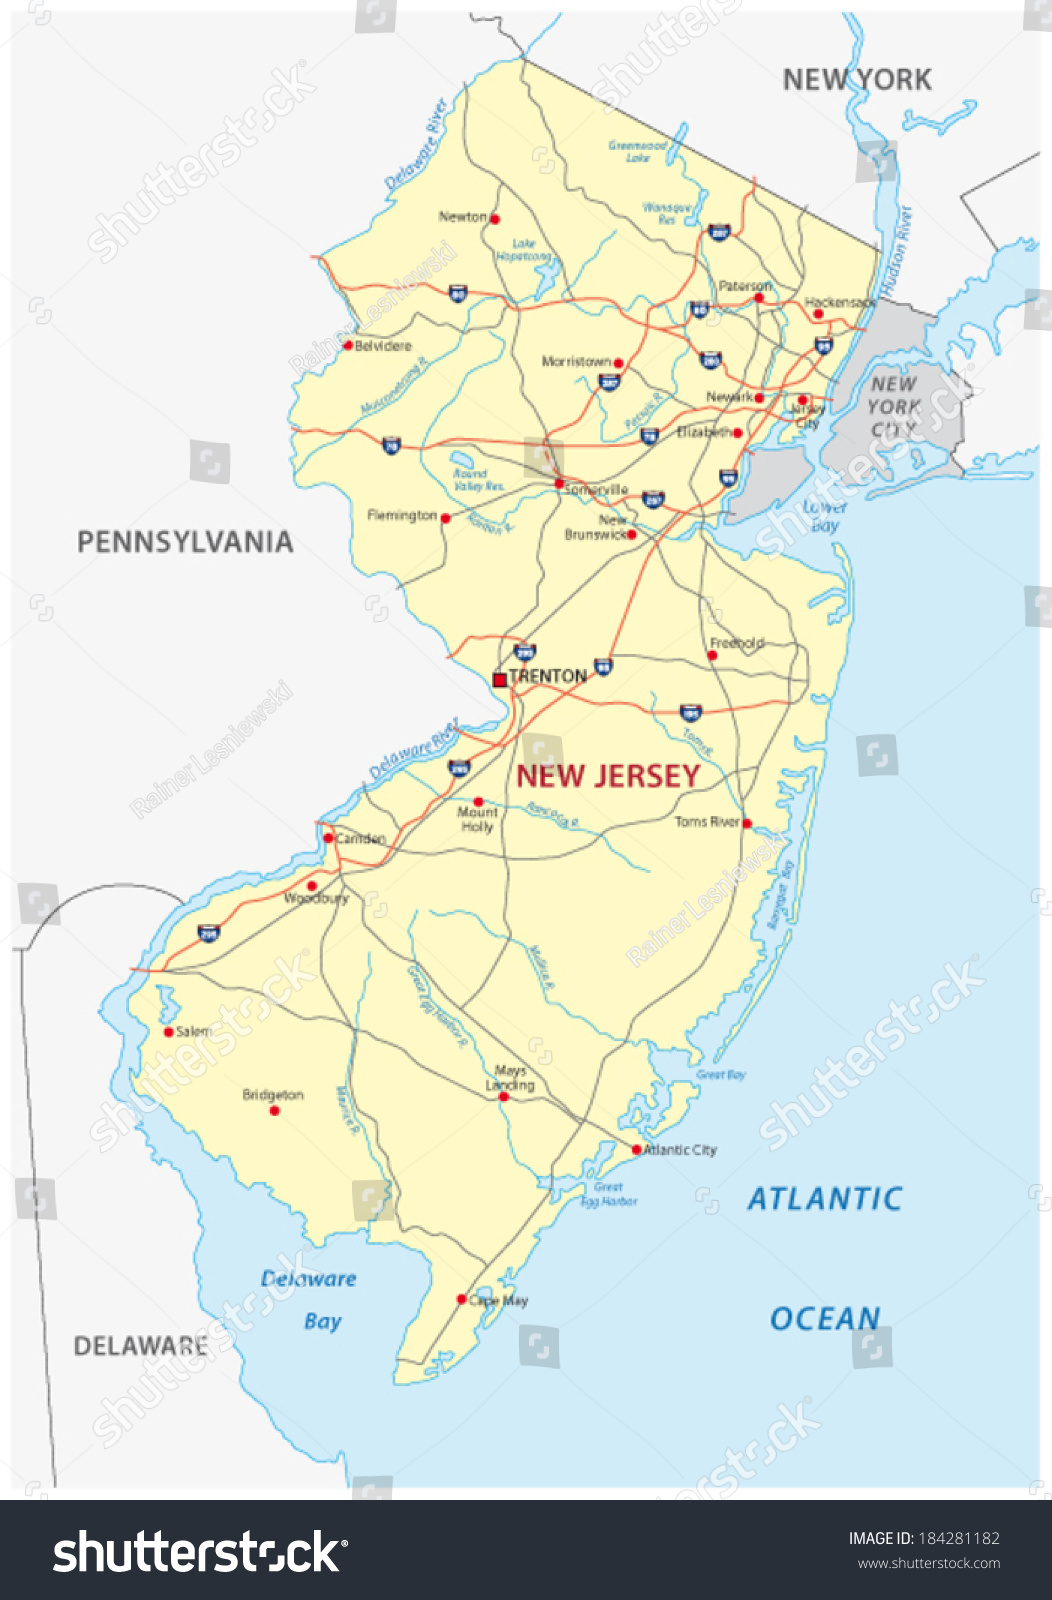 72 Map of new jersey bay Images, Stock Photos & Vectors | Shutterstock